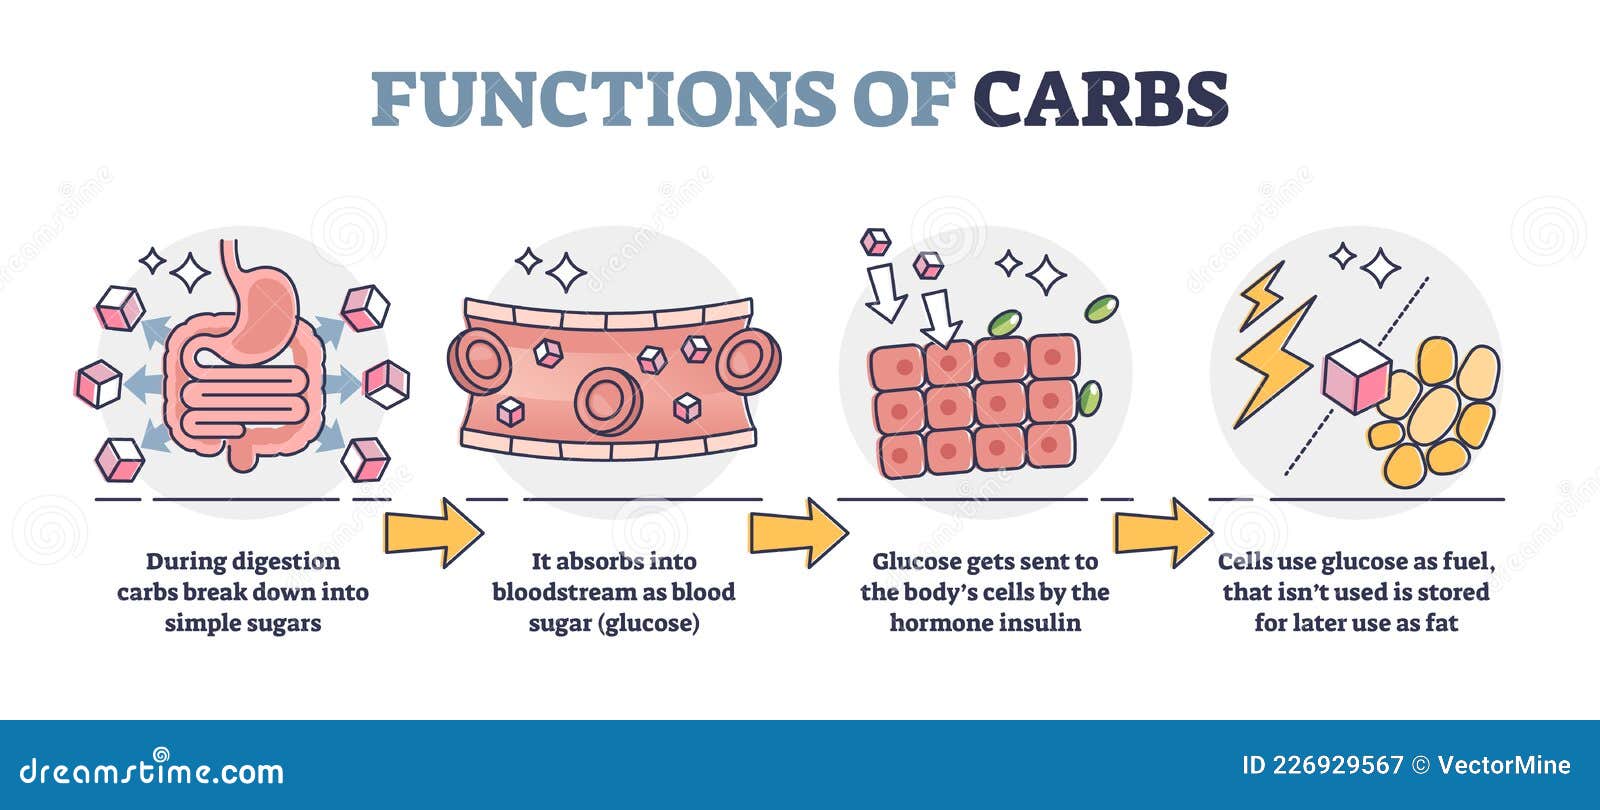 functions of carbs and carbohydrates in digestive system outline diagram